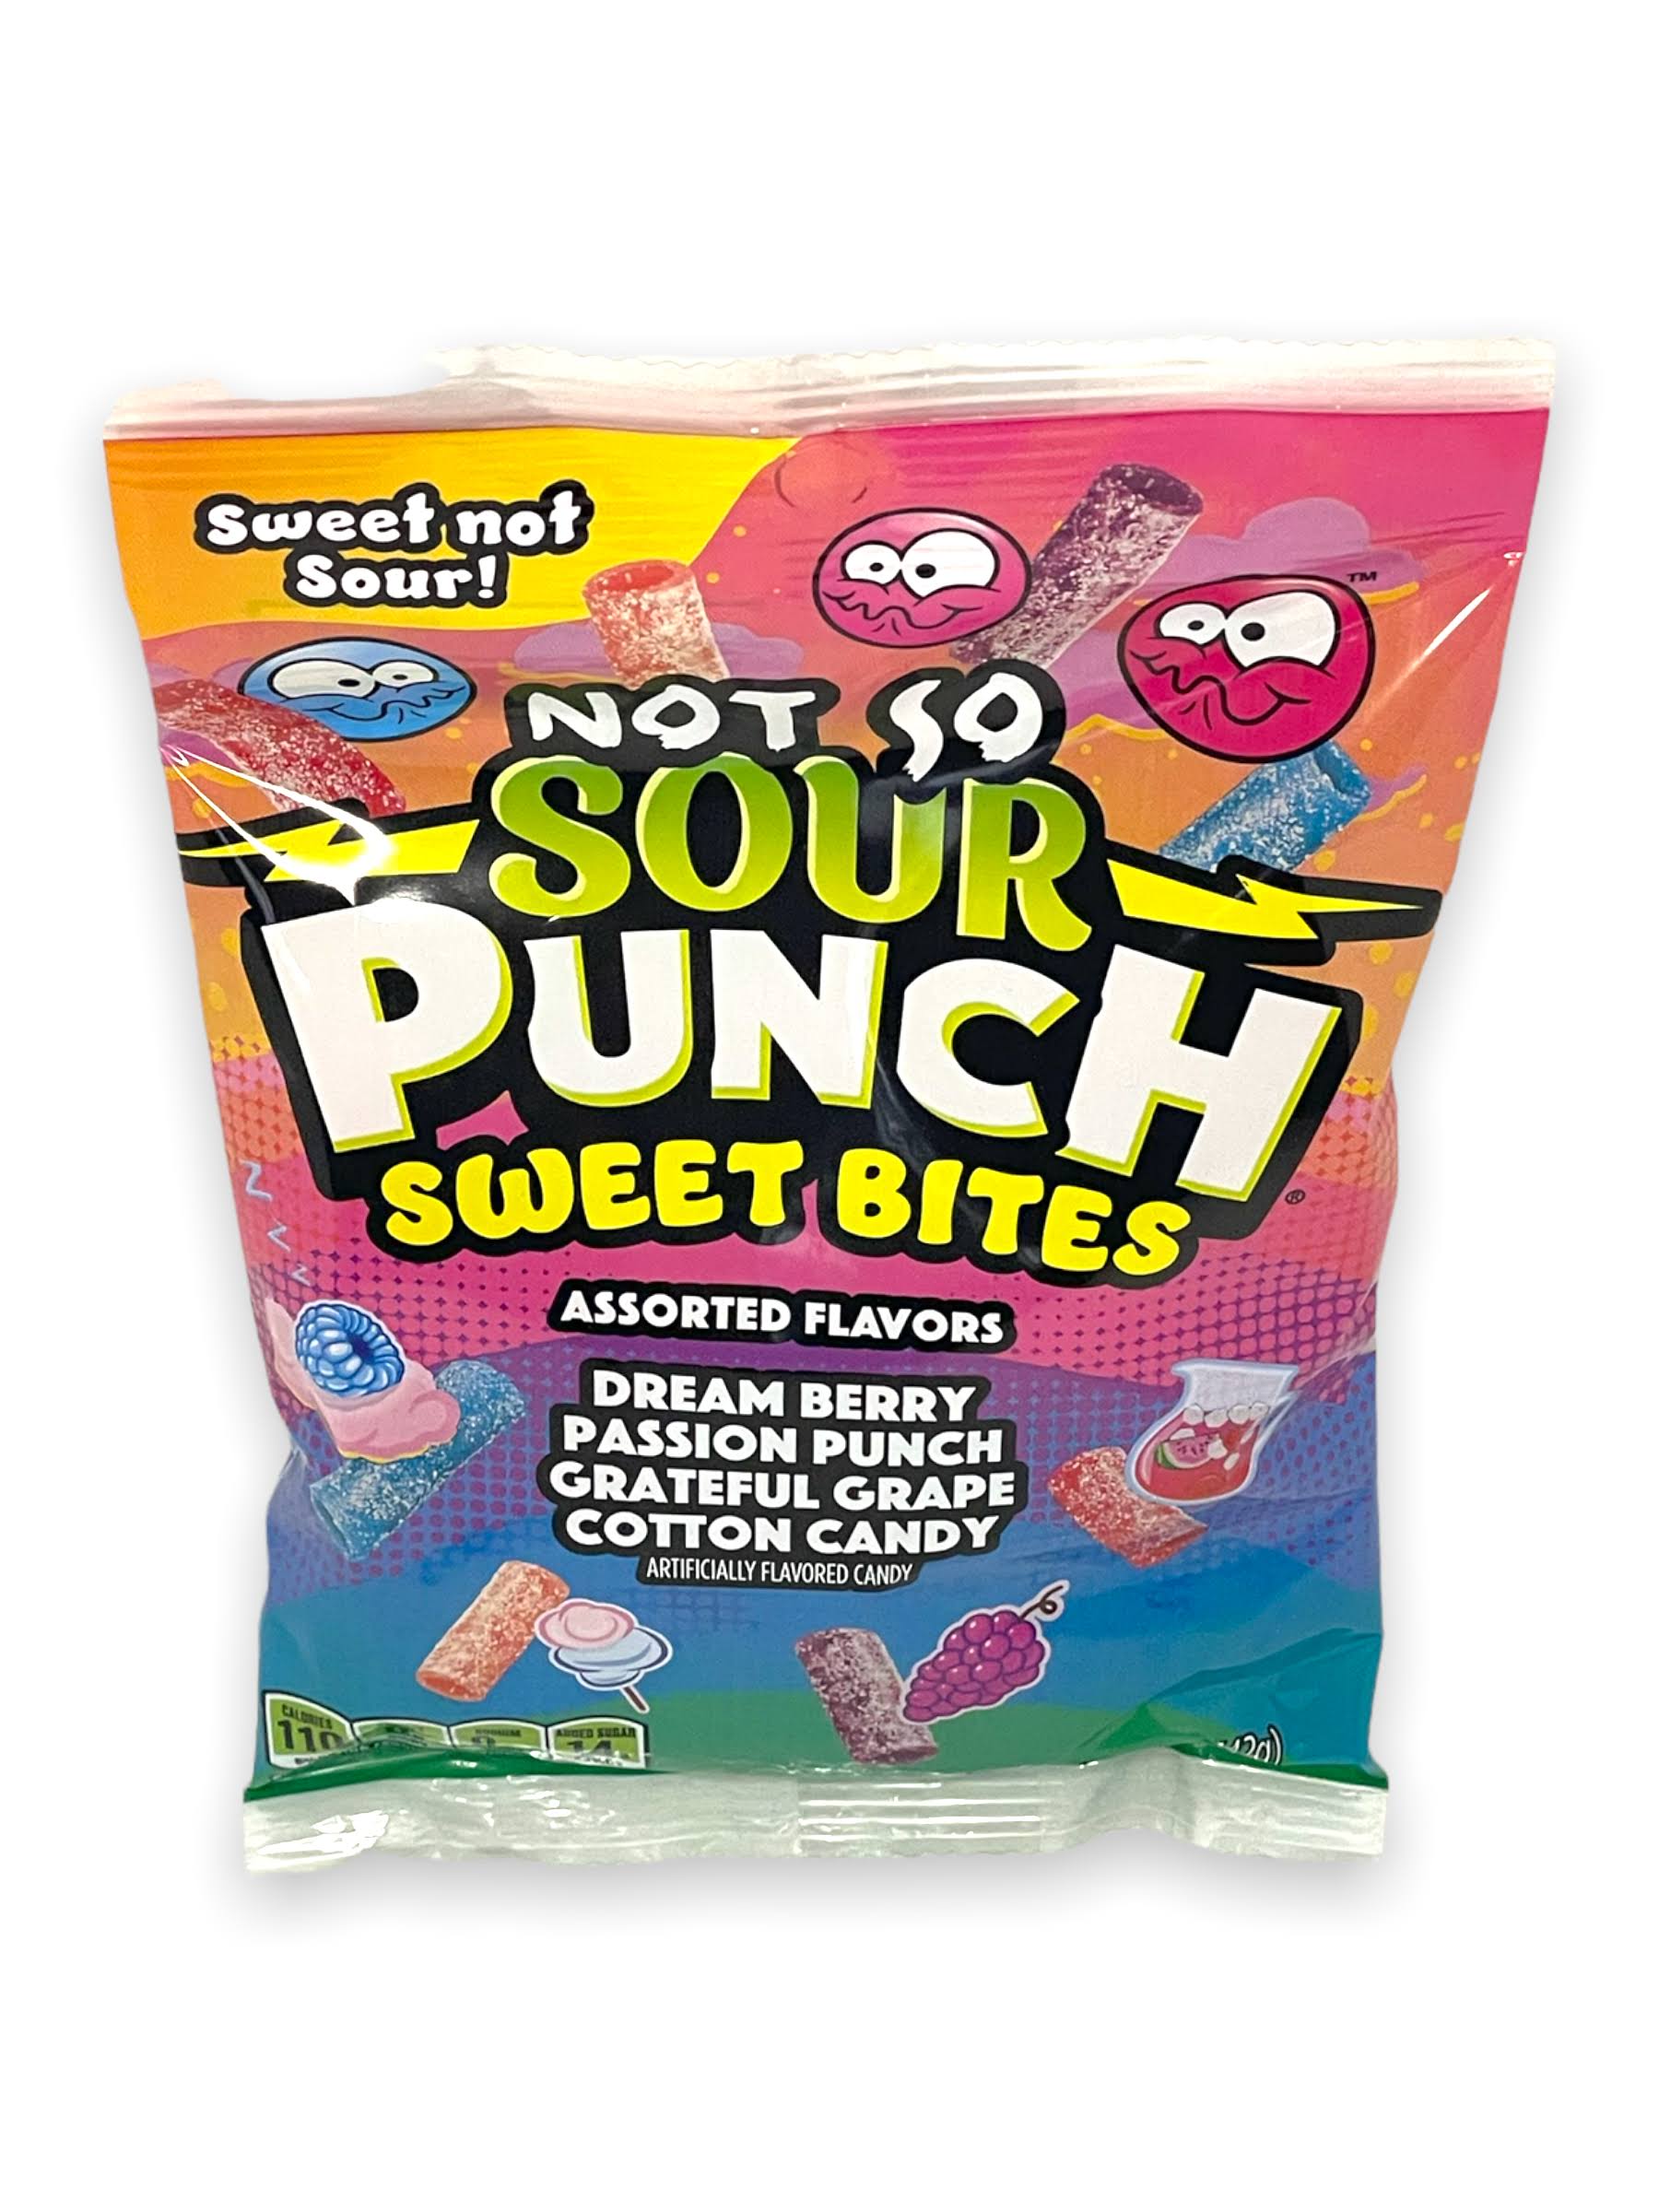 Sour Punch Sweet Bites Not So Sour